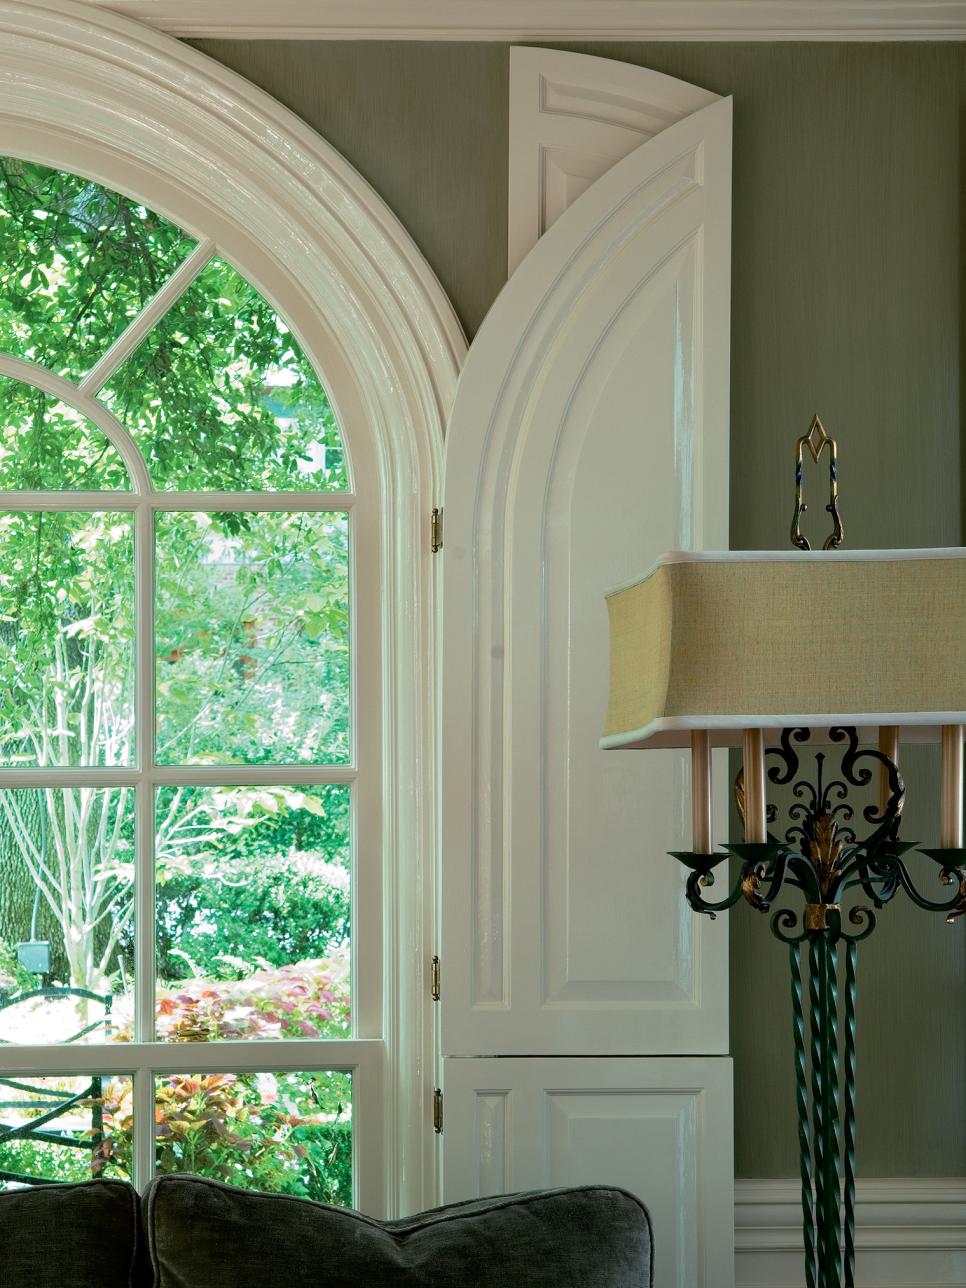 Arched Windows Overlook a Bright and Beautiful Garden | HGTV